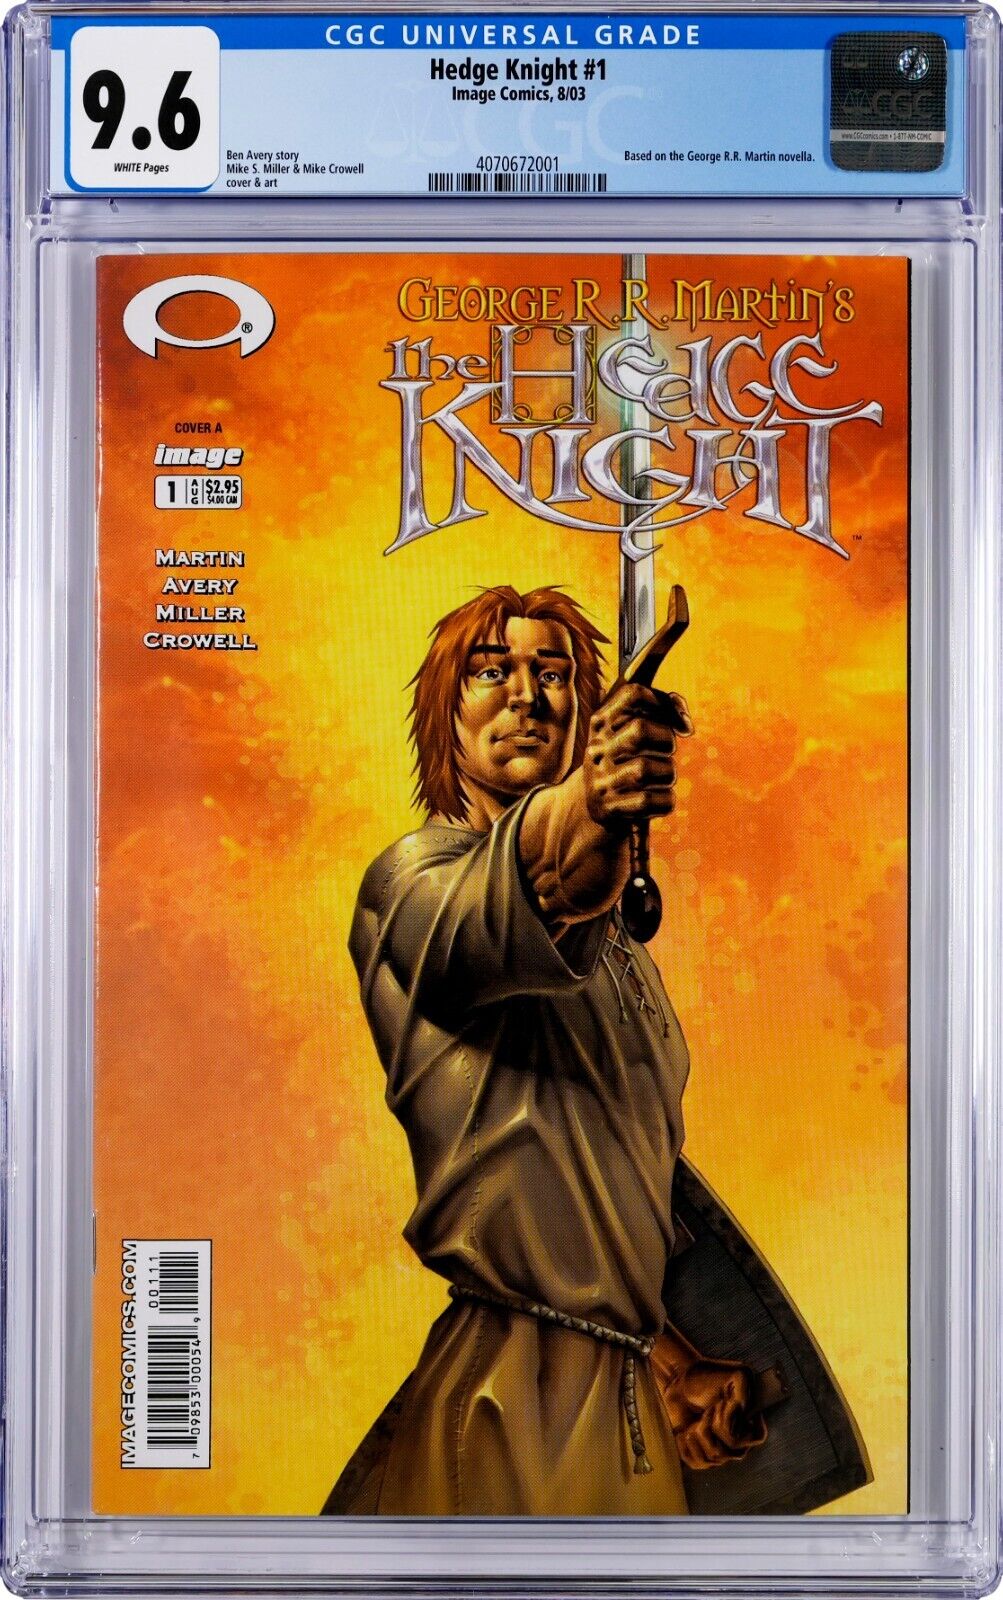 Hedge Knight #1 CGC 9.6 (Aug 2003 Image) Based George R.R. Martin Novel, Cover A